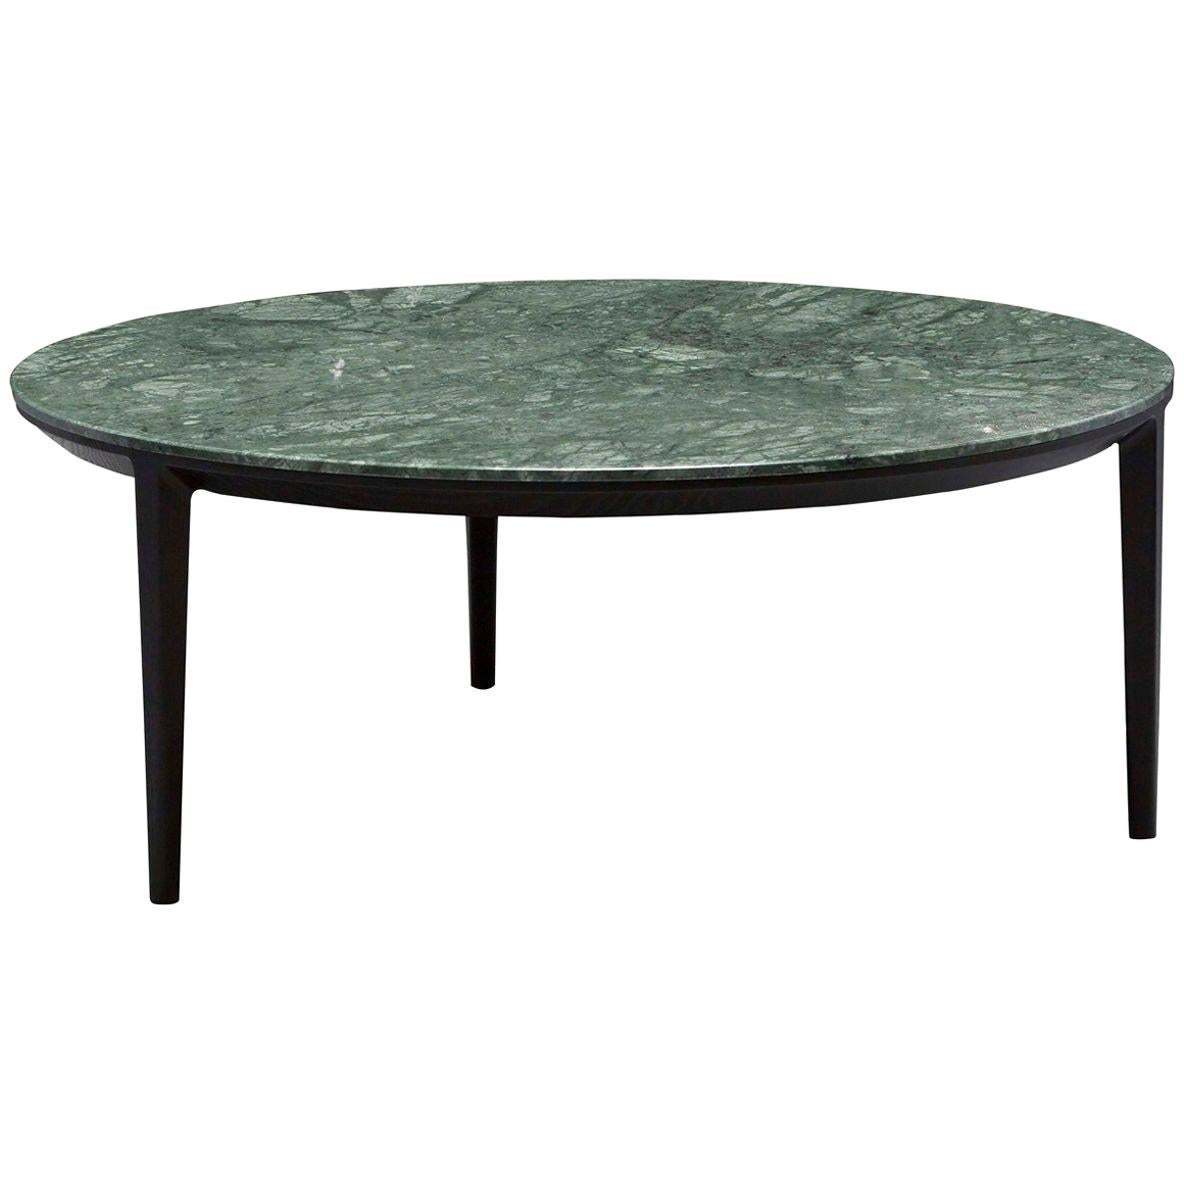 SP01 Etoile Coffee Table in Green Verde Guatemala Marble, Made in Italy